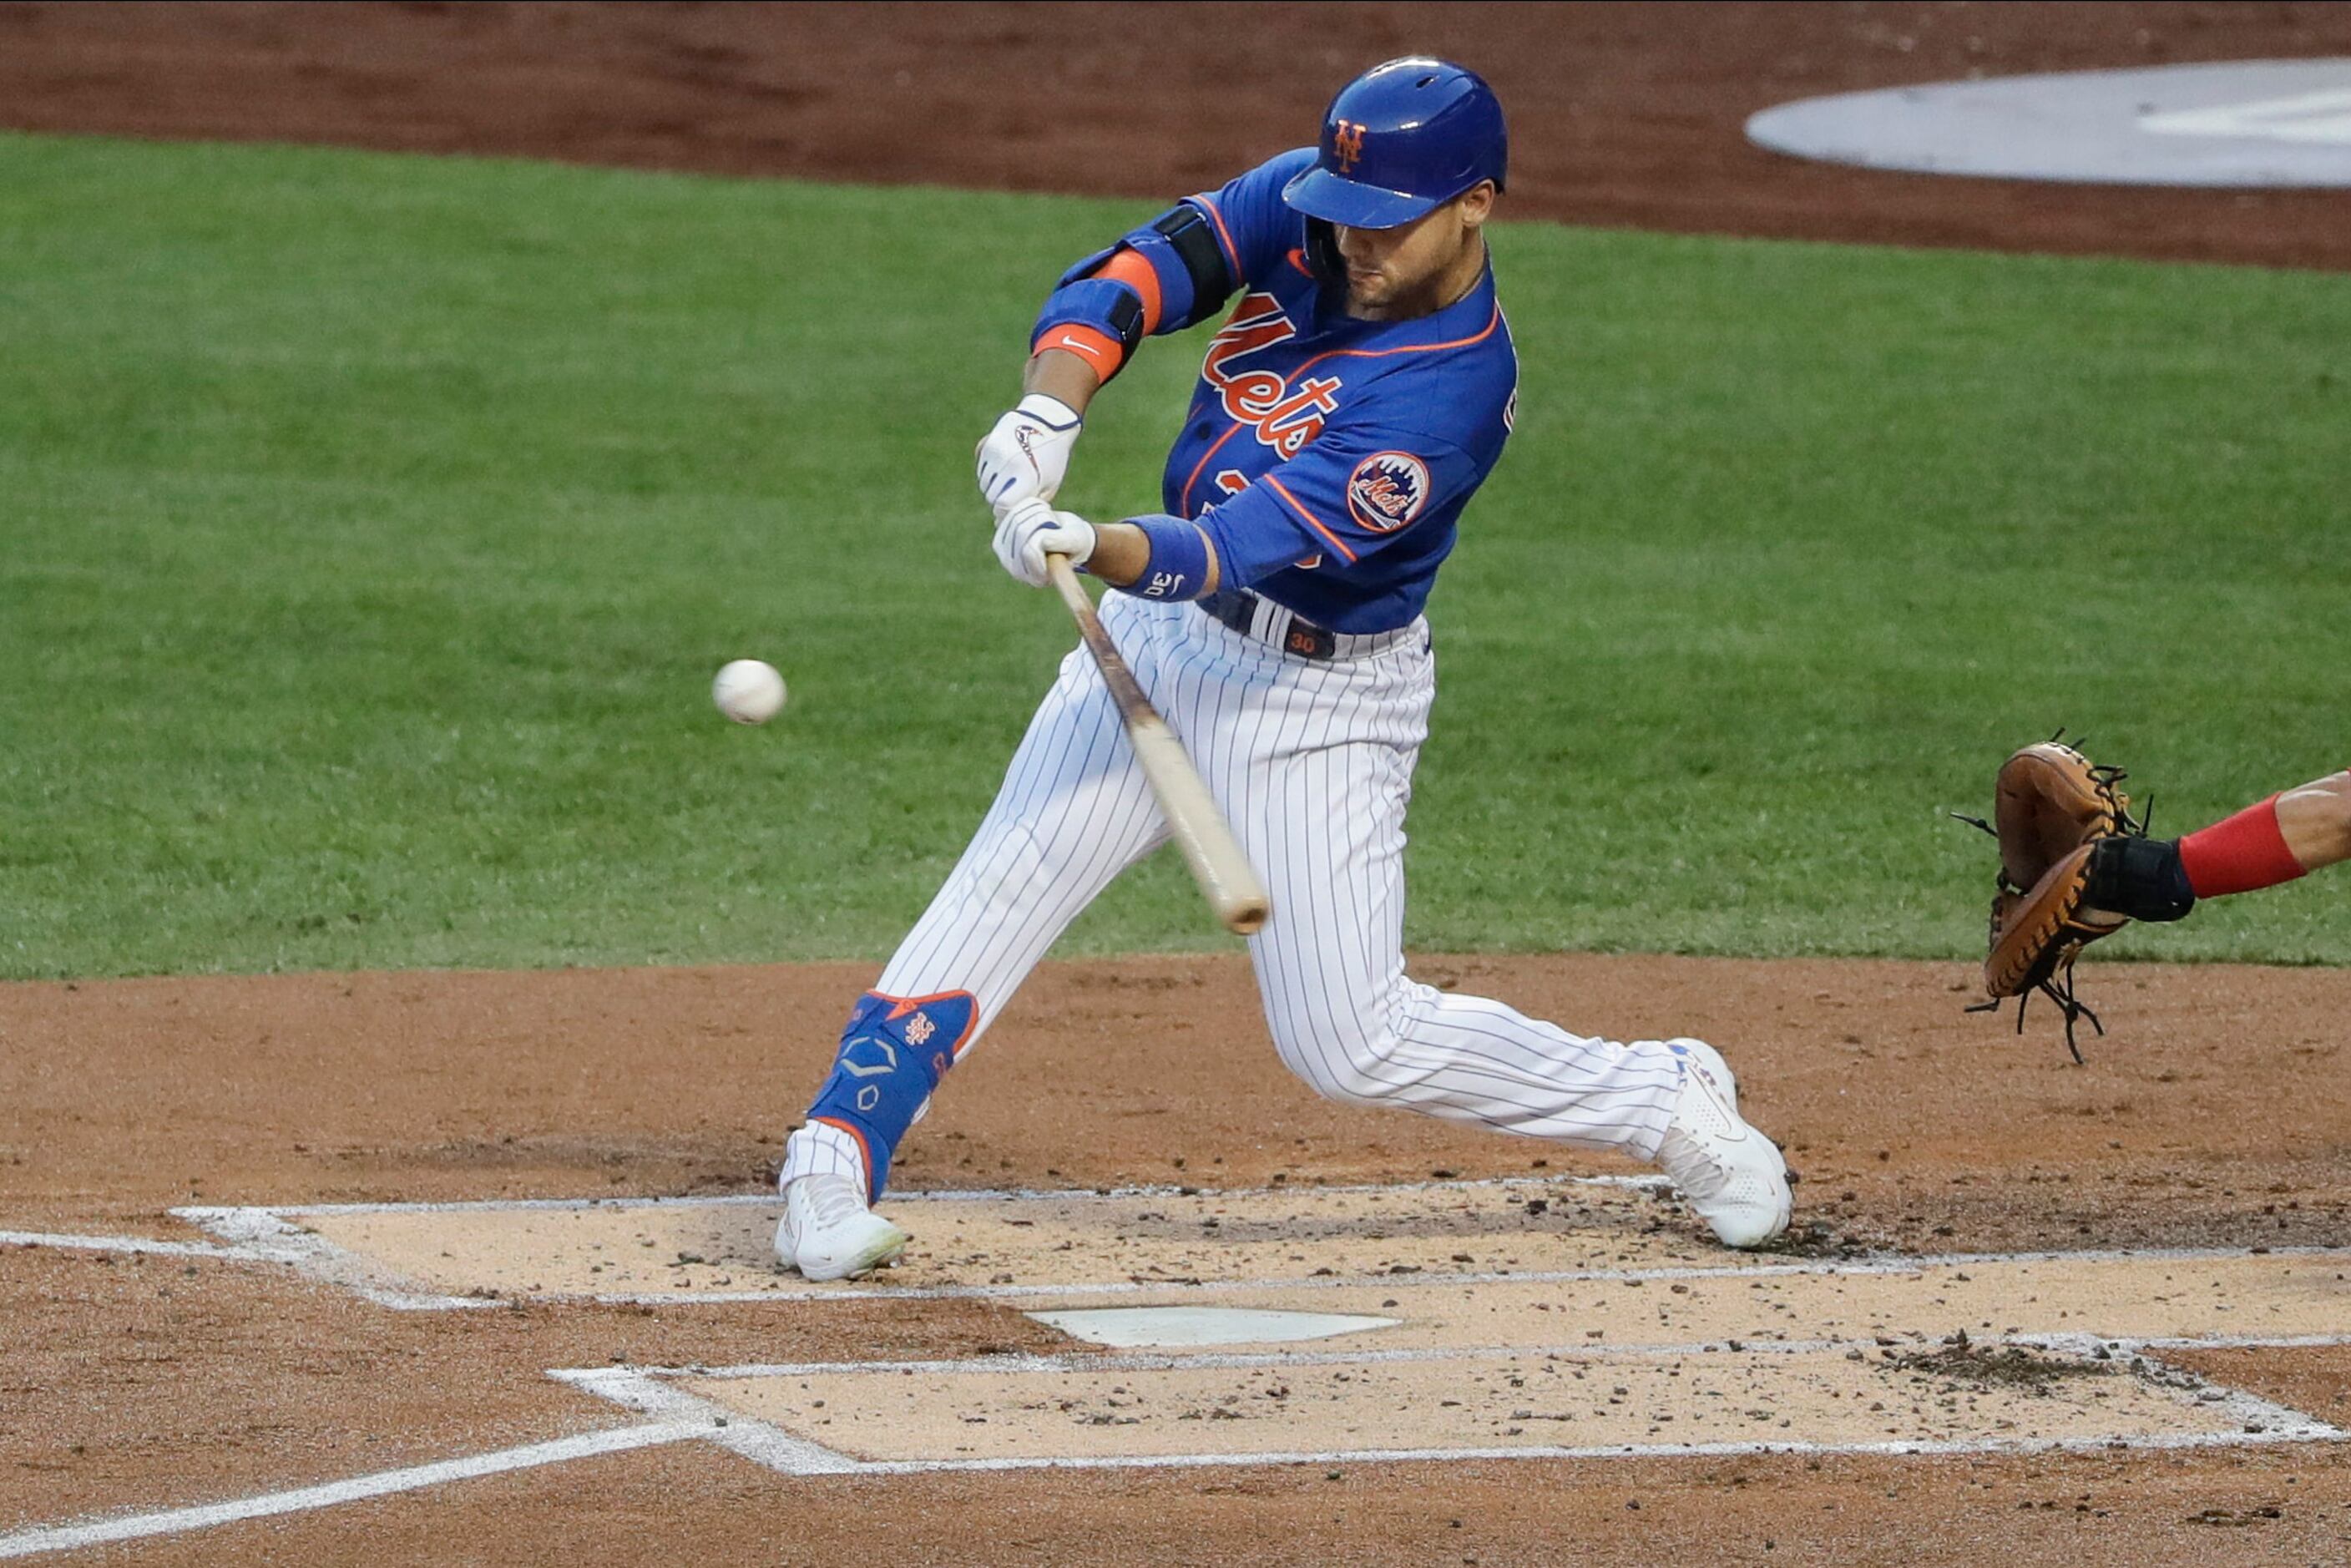 Giants sign Michael Conforto to two year, $36 million contract